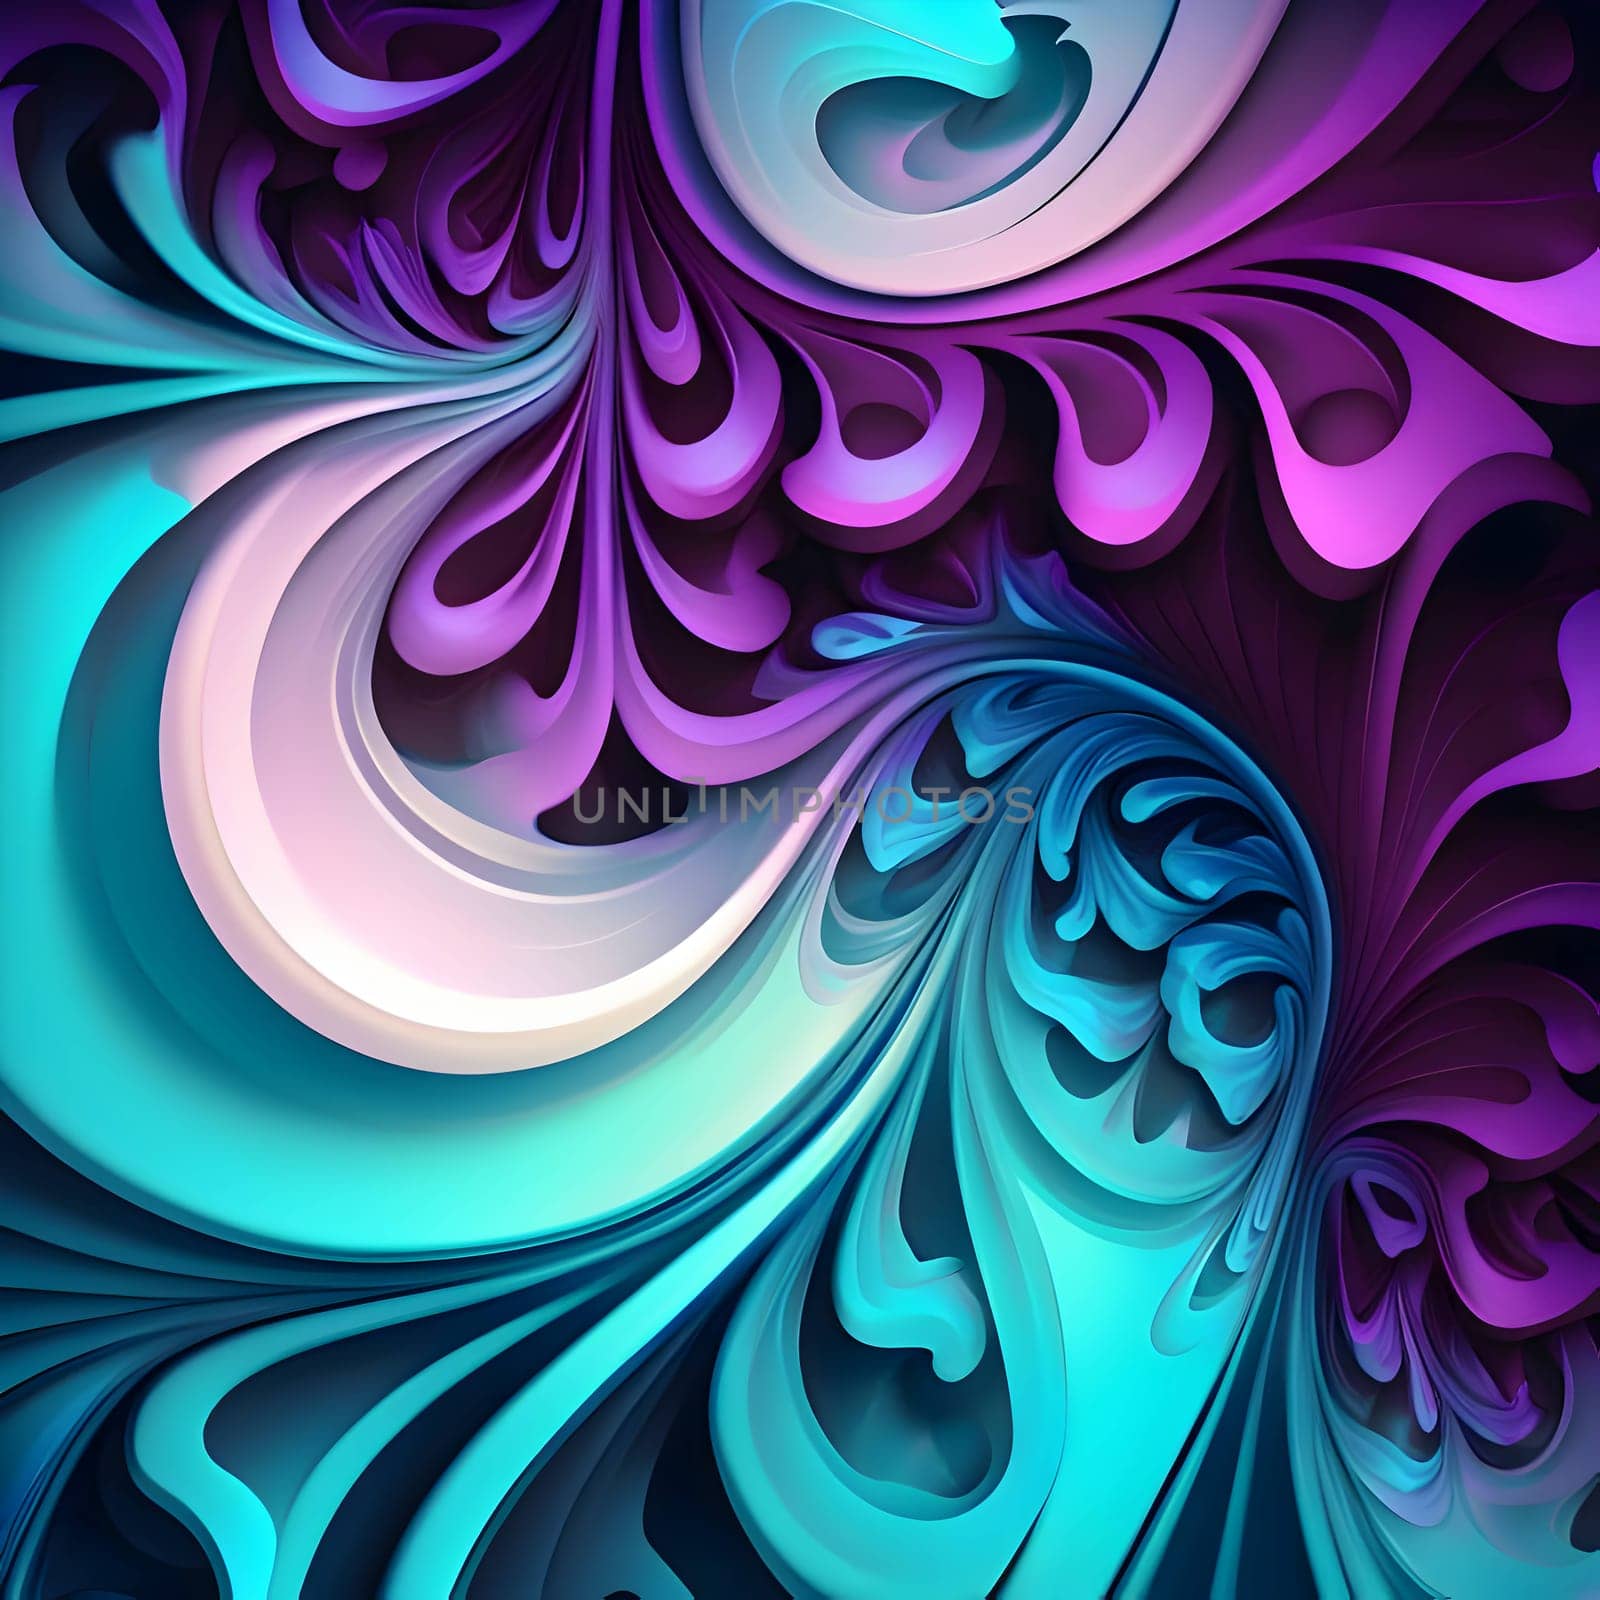 Abstract background is a stunning and mesmerizing display of fluid beauty. The image features a range of vibrant colors and intricate liquid latex shapes that seem to move and flow like waves. by ThemesS